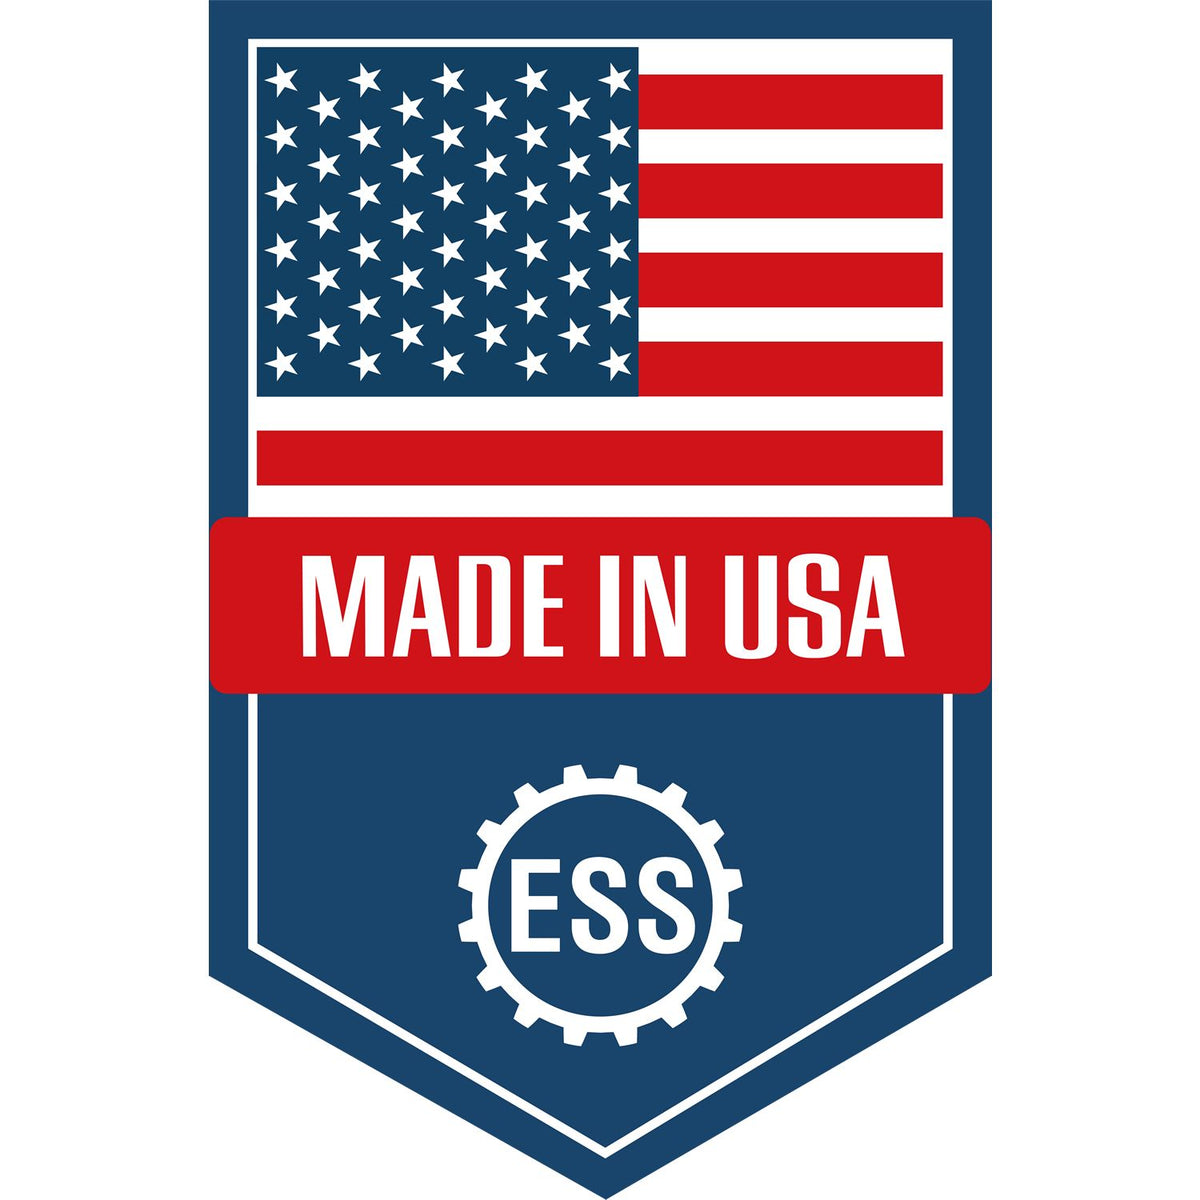 An icon or graphic with an american flag and text reading Made in USA for the Slim Pre-Inked Michigan Landscape Architect Seal Stamp